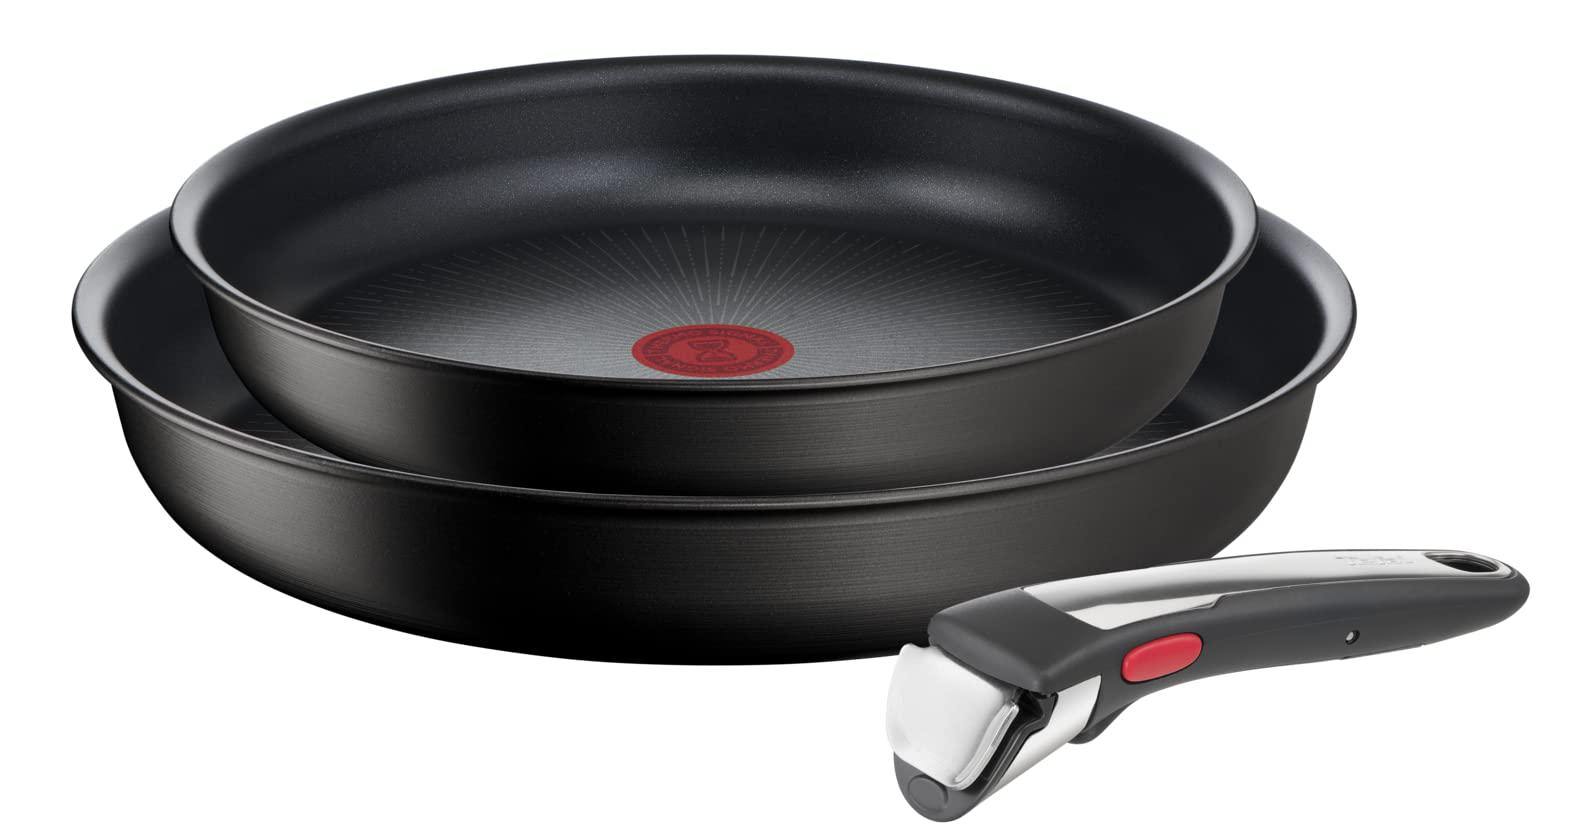 TEFAL tefal ingenio unlimited on 3 piece set, frying pan set, stackable,  induction, easy cleaning, non-stick coating, heat indicato